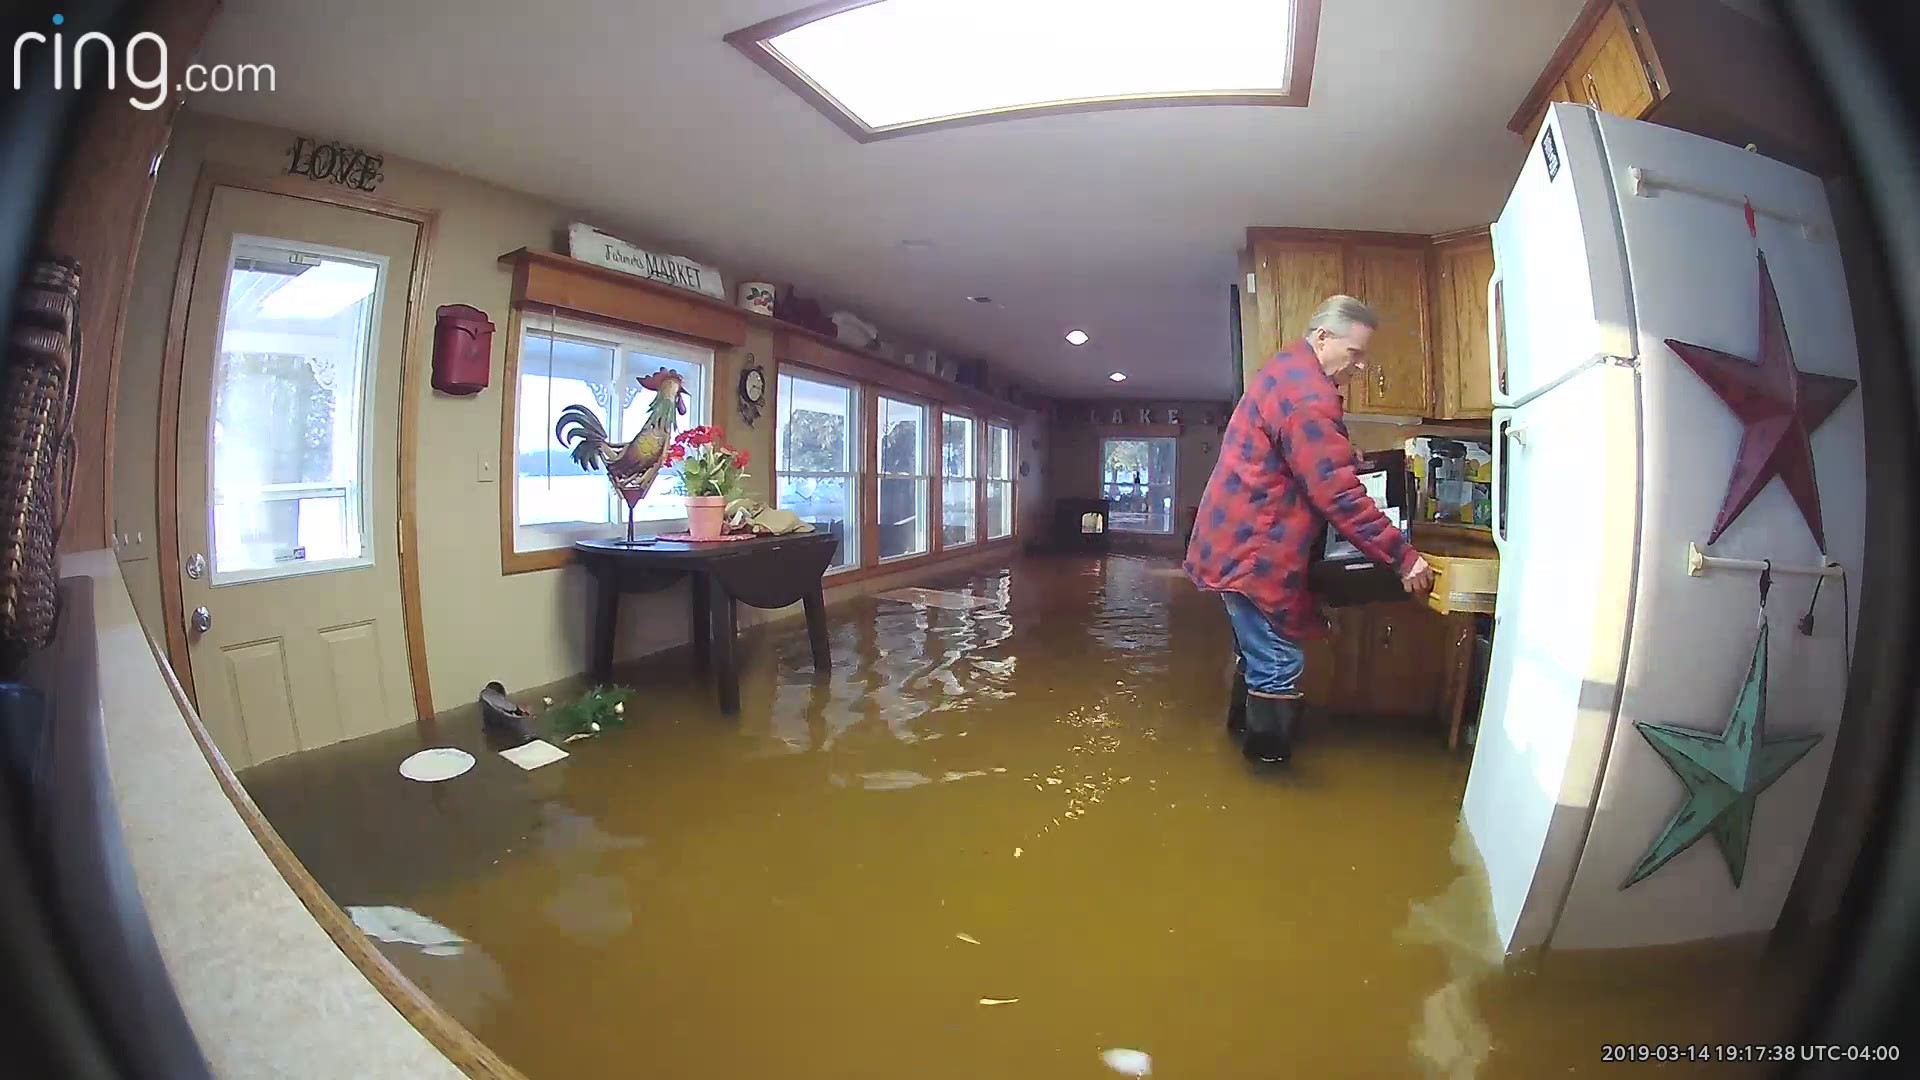 A look at the flooding damage inside a home on Martin Lake in Fremont, Mich. Video submitted by Scott and Laurie Higgins.